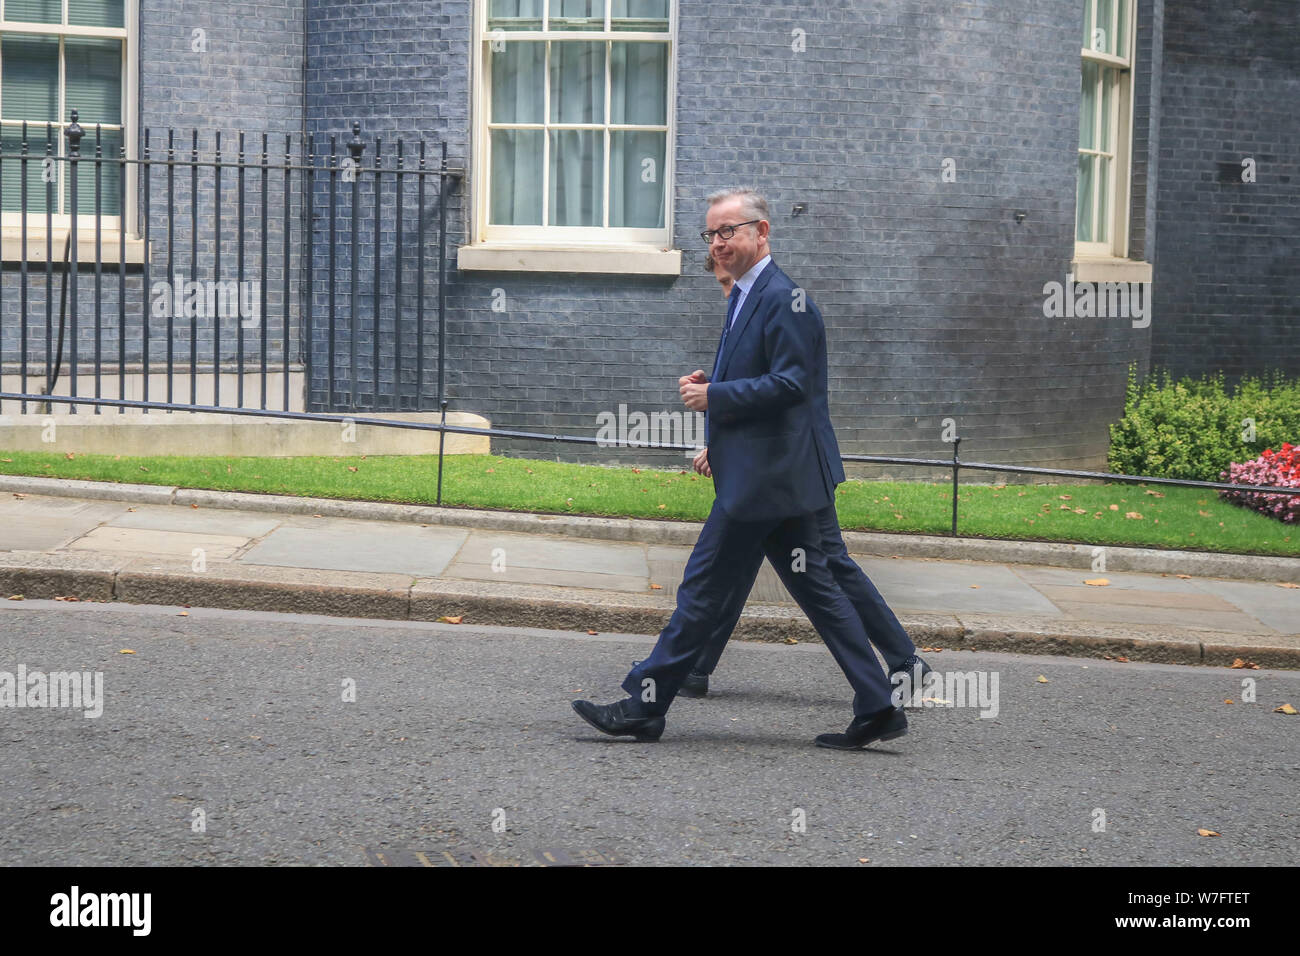 London UK. 5th August 2019. Michael Gove MP,Chancellor of the Duchy of Lancaster at Downing Street.Credit : amer ghazzal/Alamy Live News Stock Photo